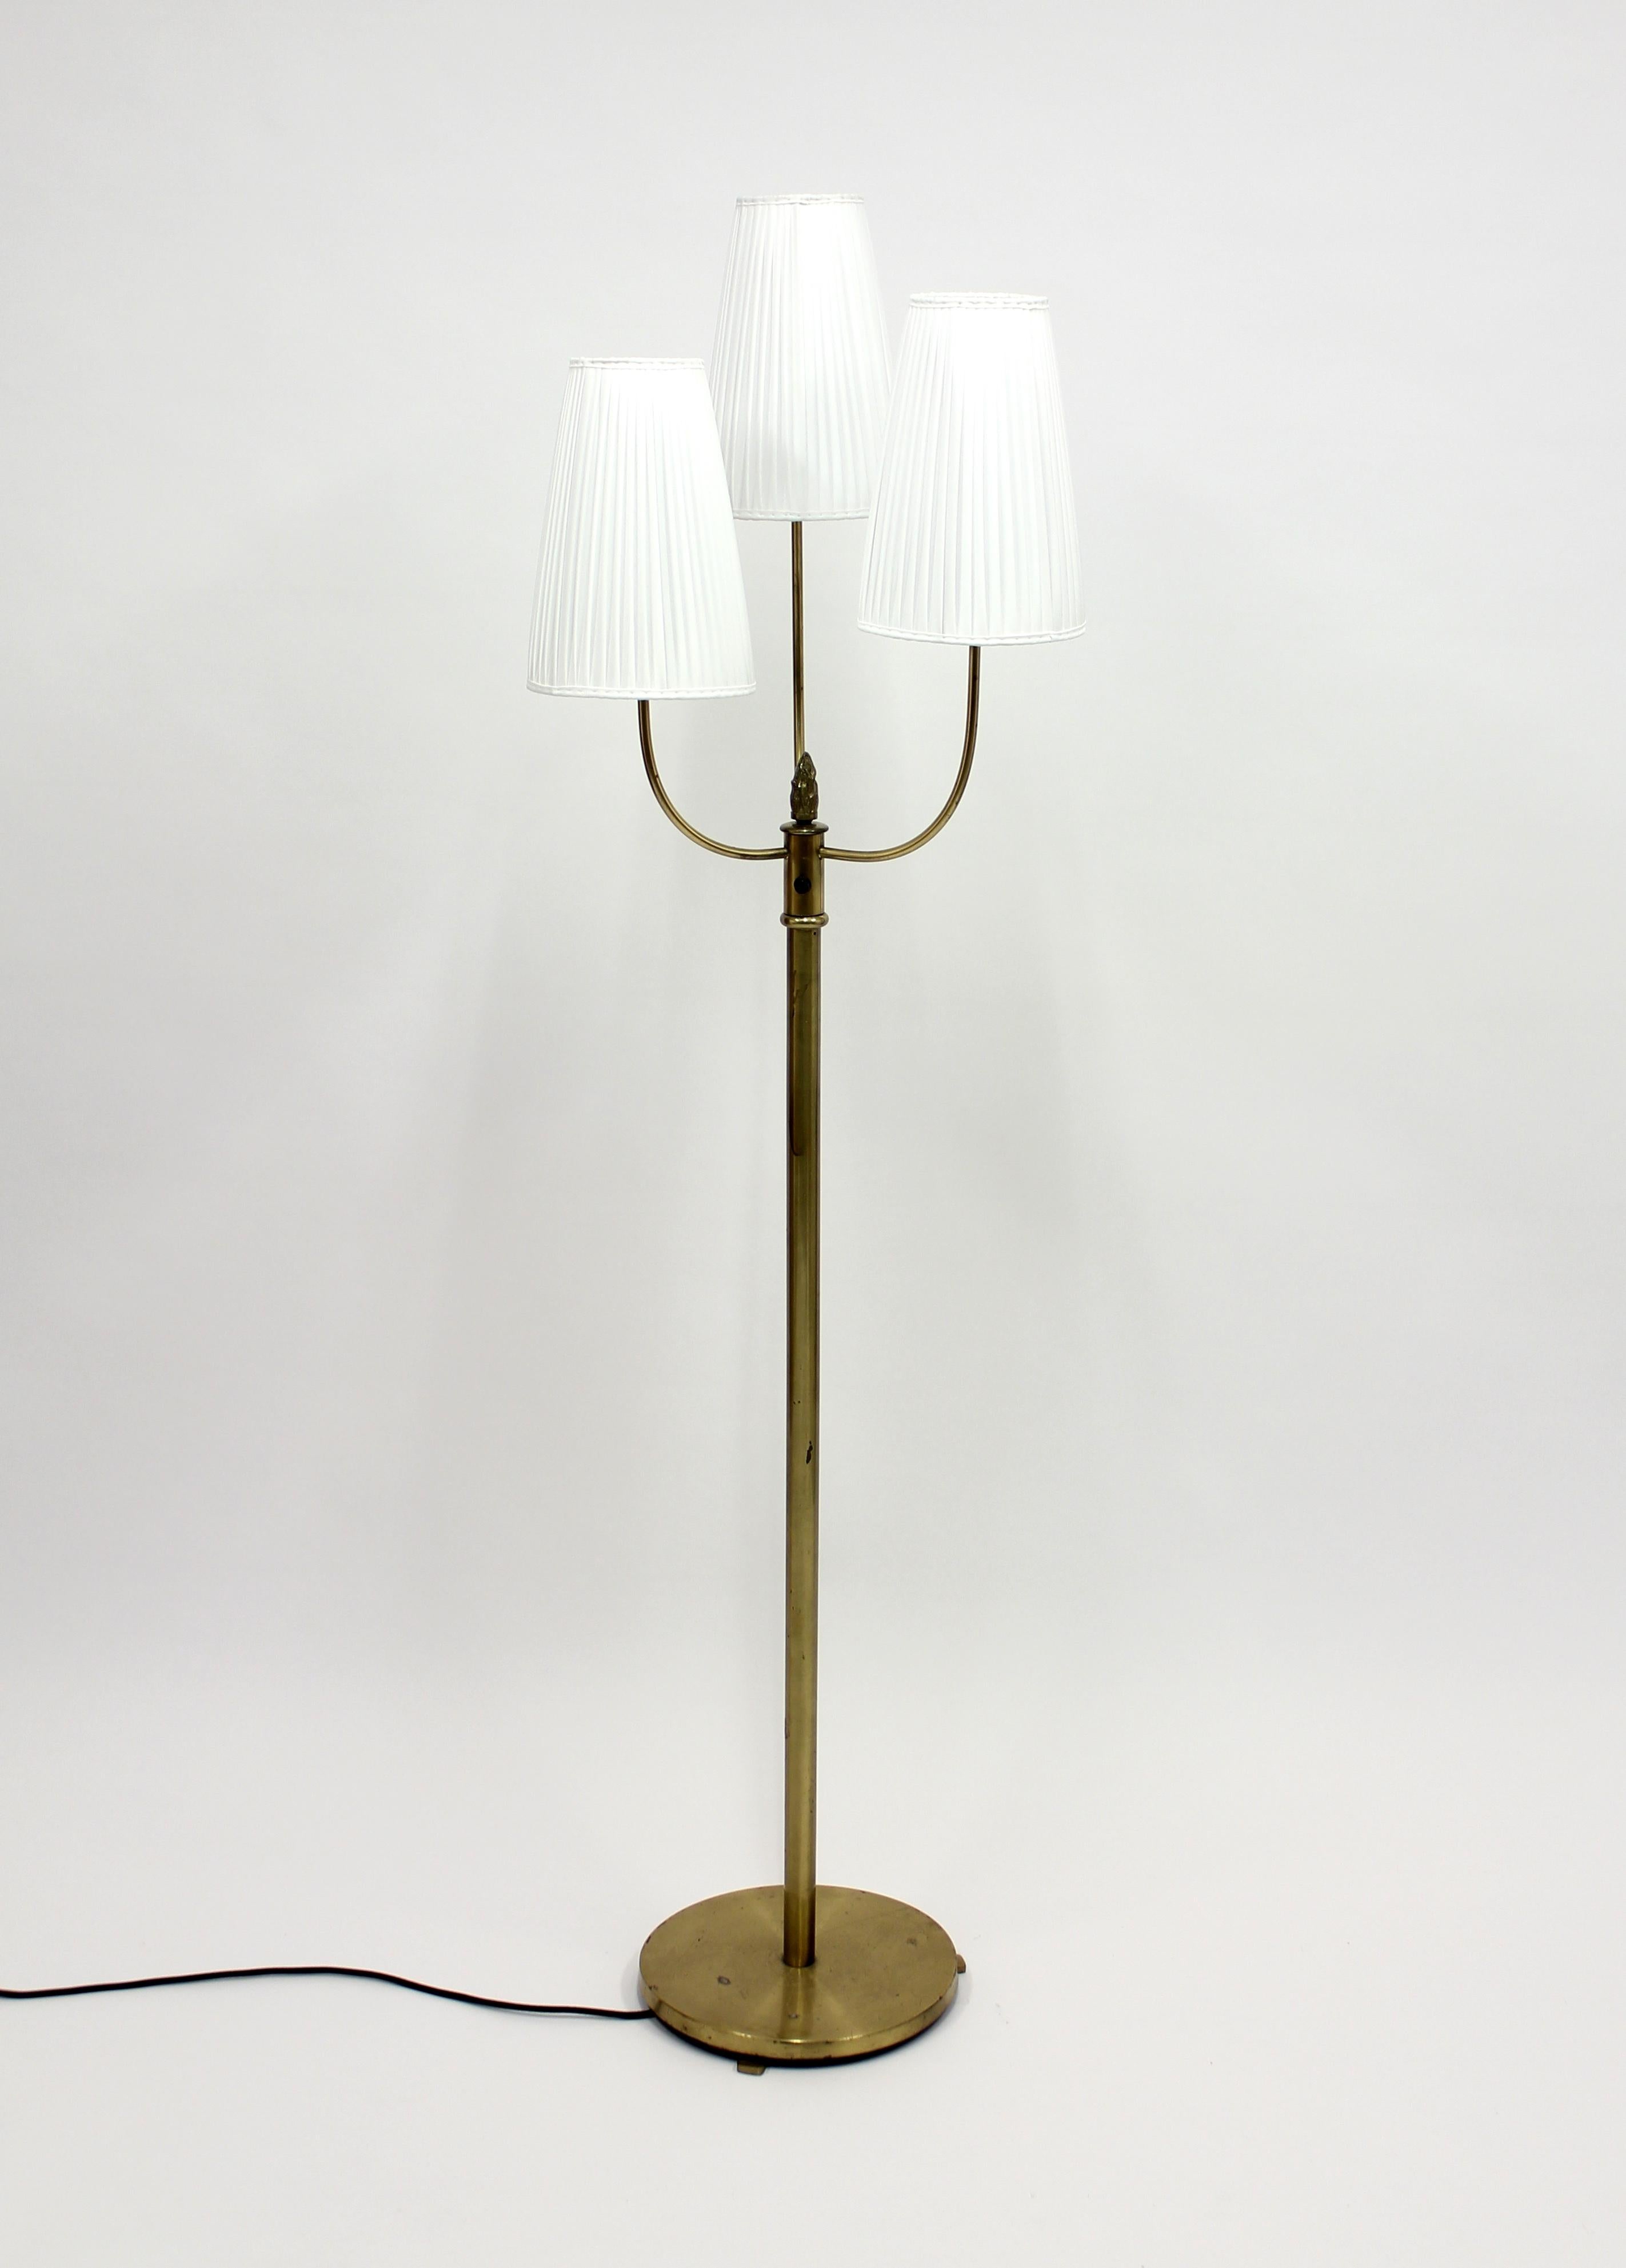 1940s brass three-light floor lamp with pleated shades set at alternating heights. Most likely made in Sweden. This is a very good example of the so called 